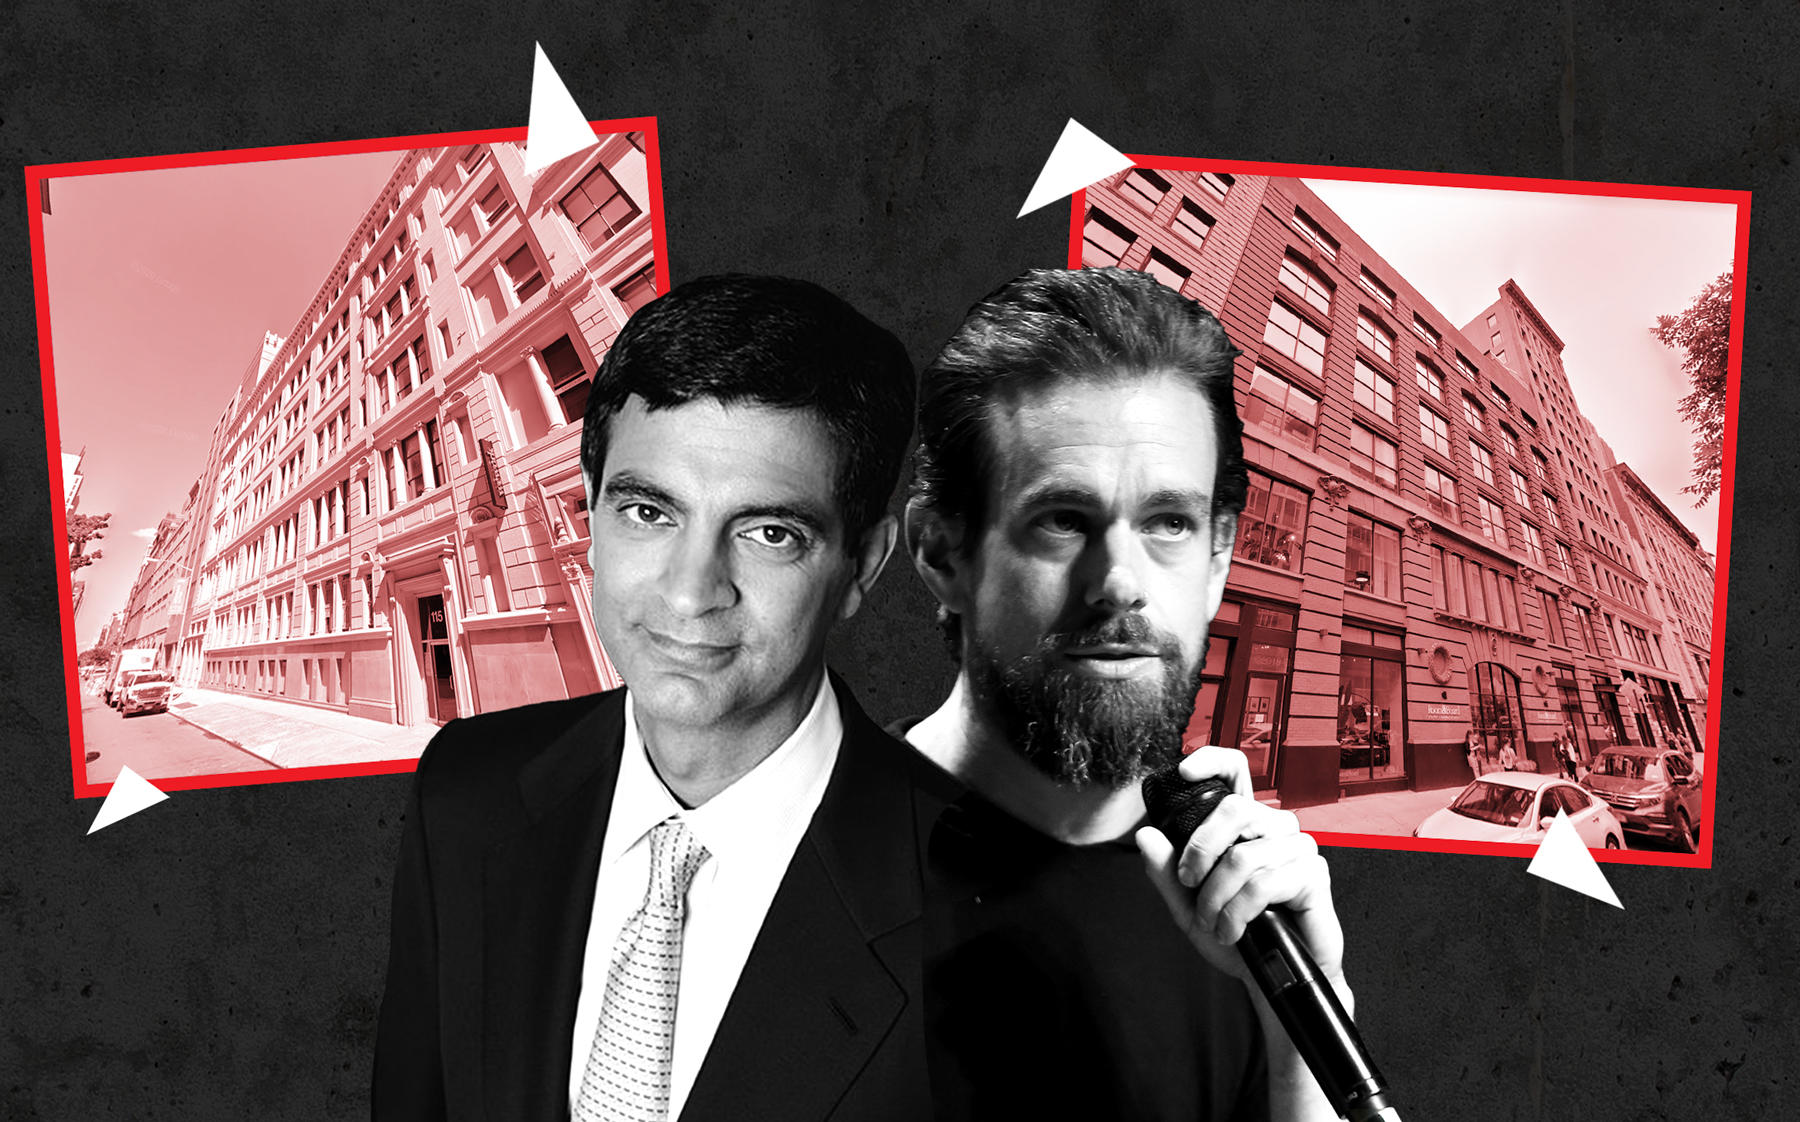 WeWork CEO Sandeep Mathrani with WeWork's headquarters at 115 West 18th Street and Twitter CEO Jack Dorsey with Twitter headquarters at 247 West 18th Street (Credit: Google Maps; Getty Images)